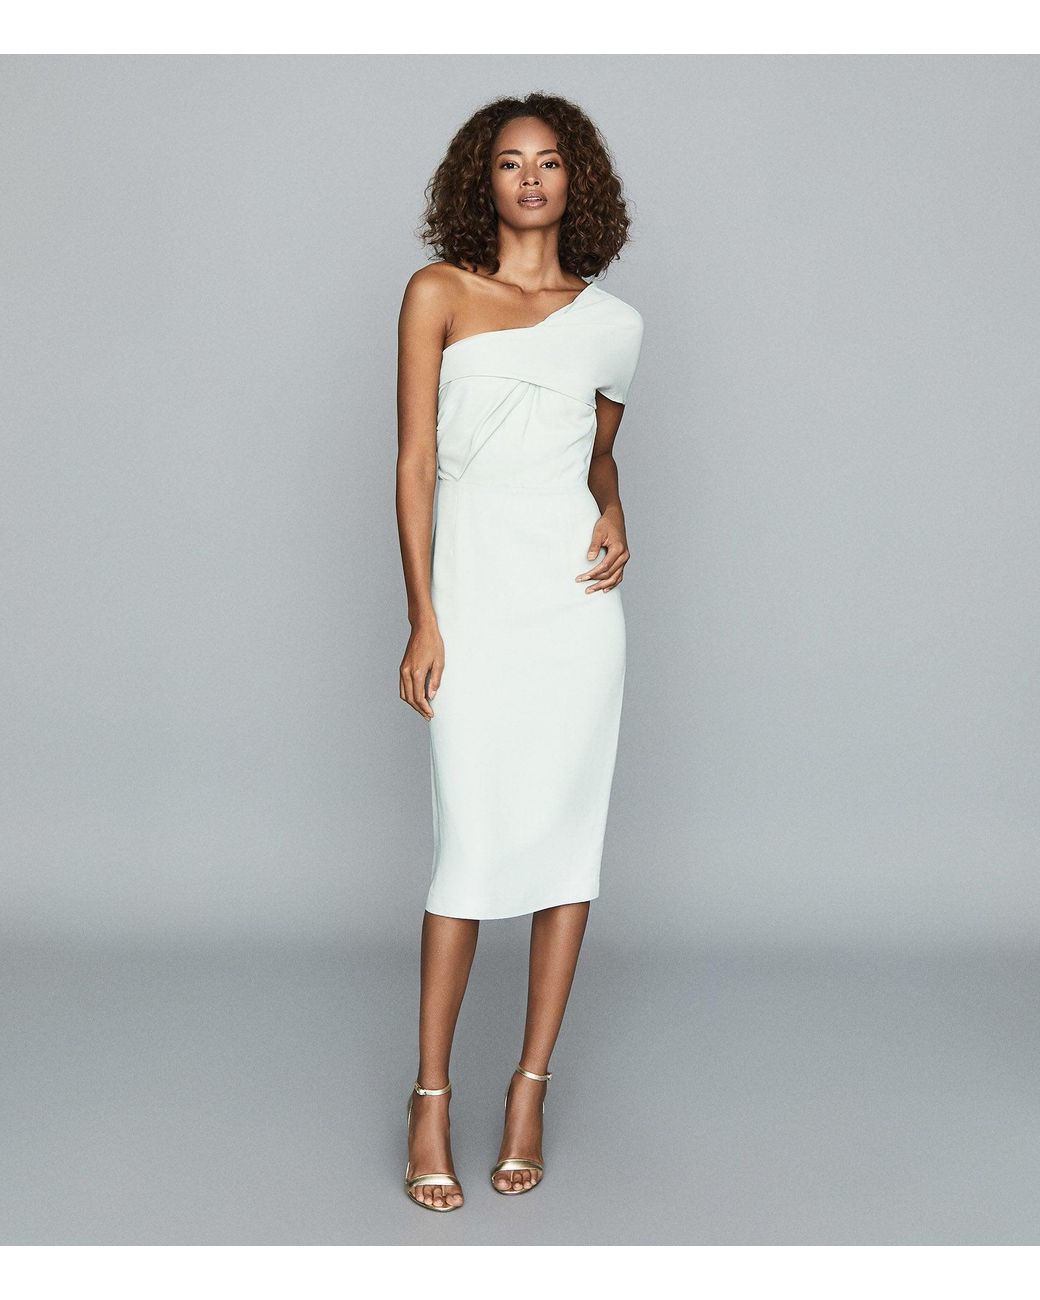 Reiss Synthetic Riana - One Shoulder Bodycon Dress in White - Lyst